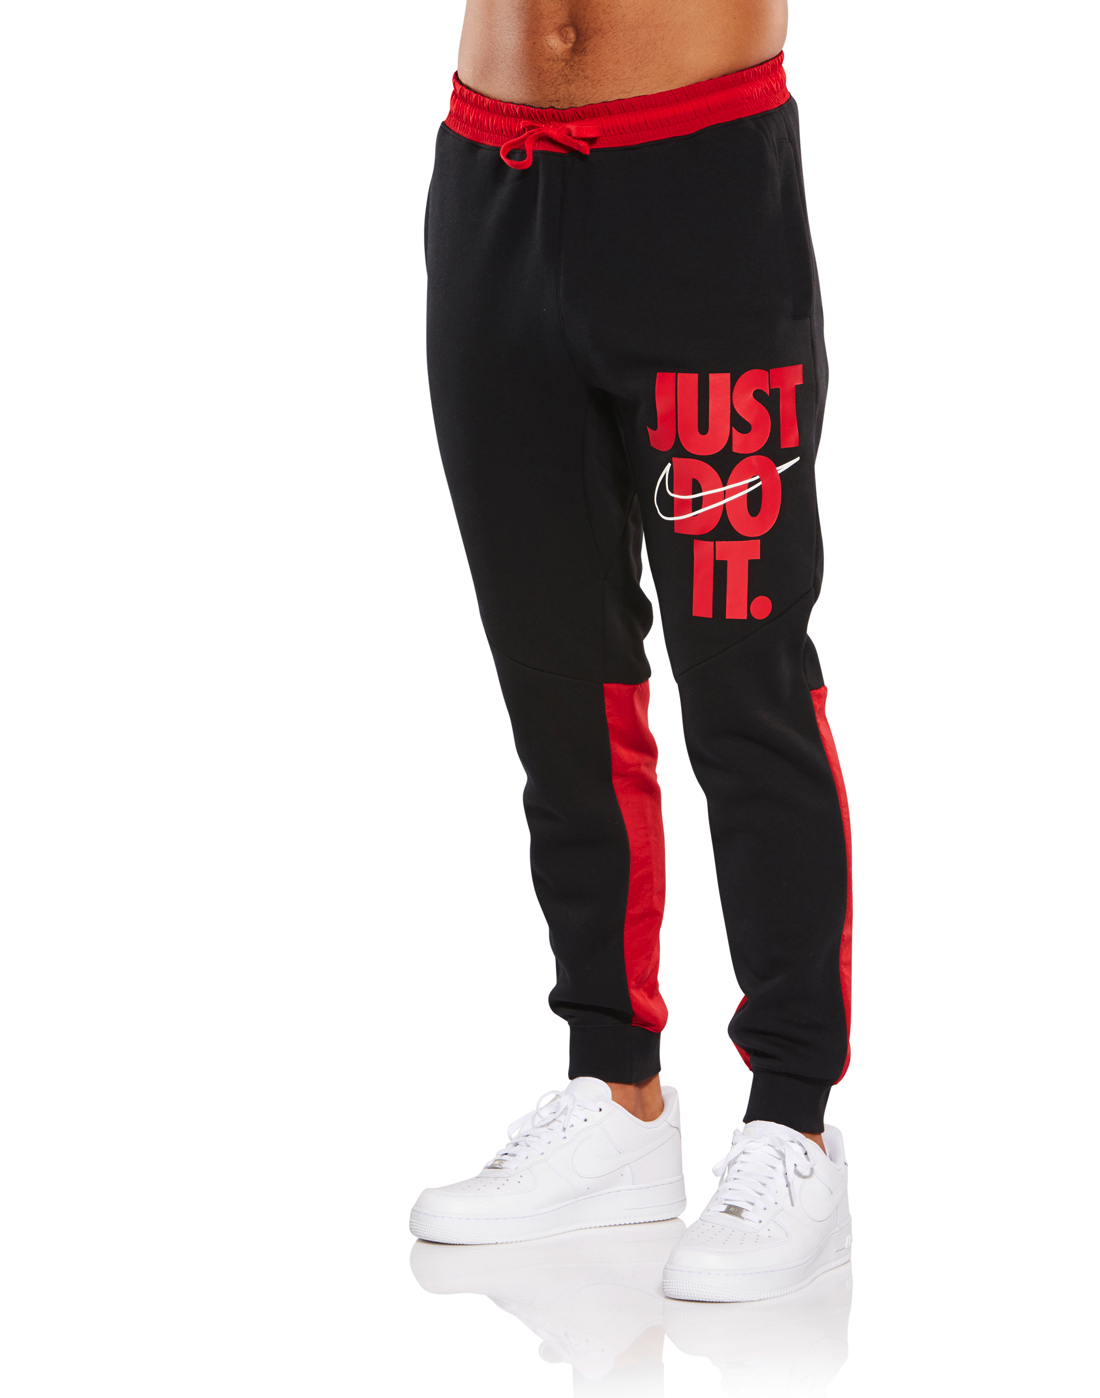 men's nike black and red tracksuit